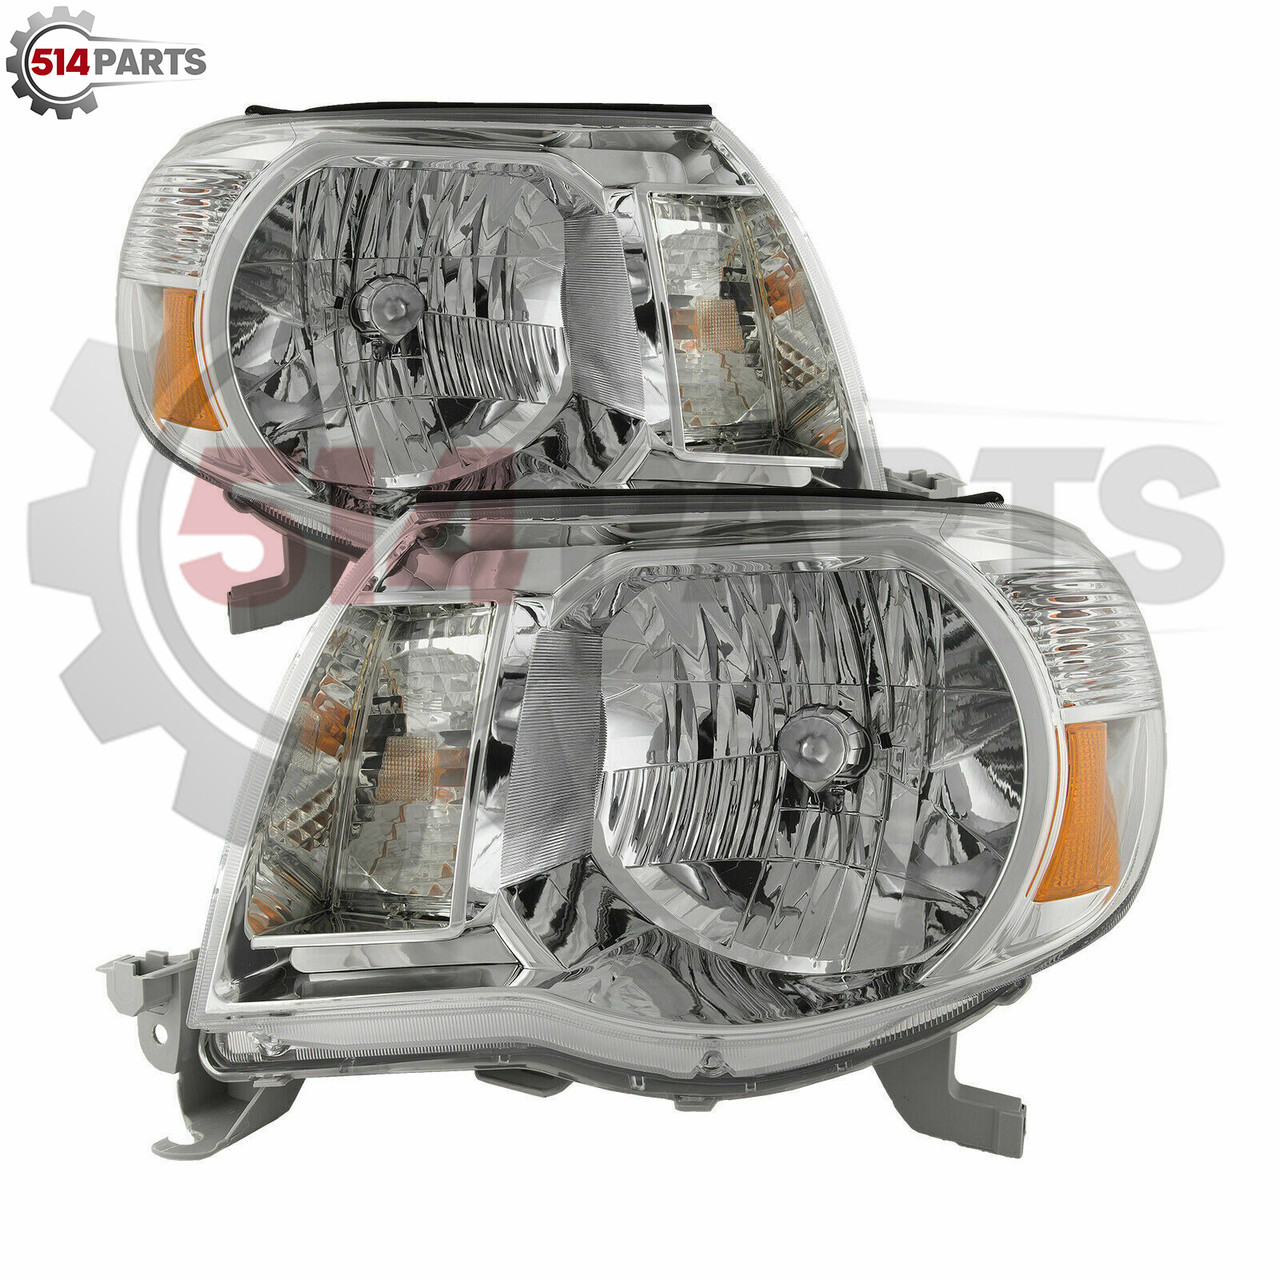 2005 - 2011 TOYOTA TACOMA 2WD & 4WD without SPORT PKG HEADLIGHTS - PHARES AVANT